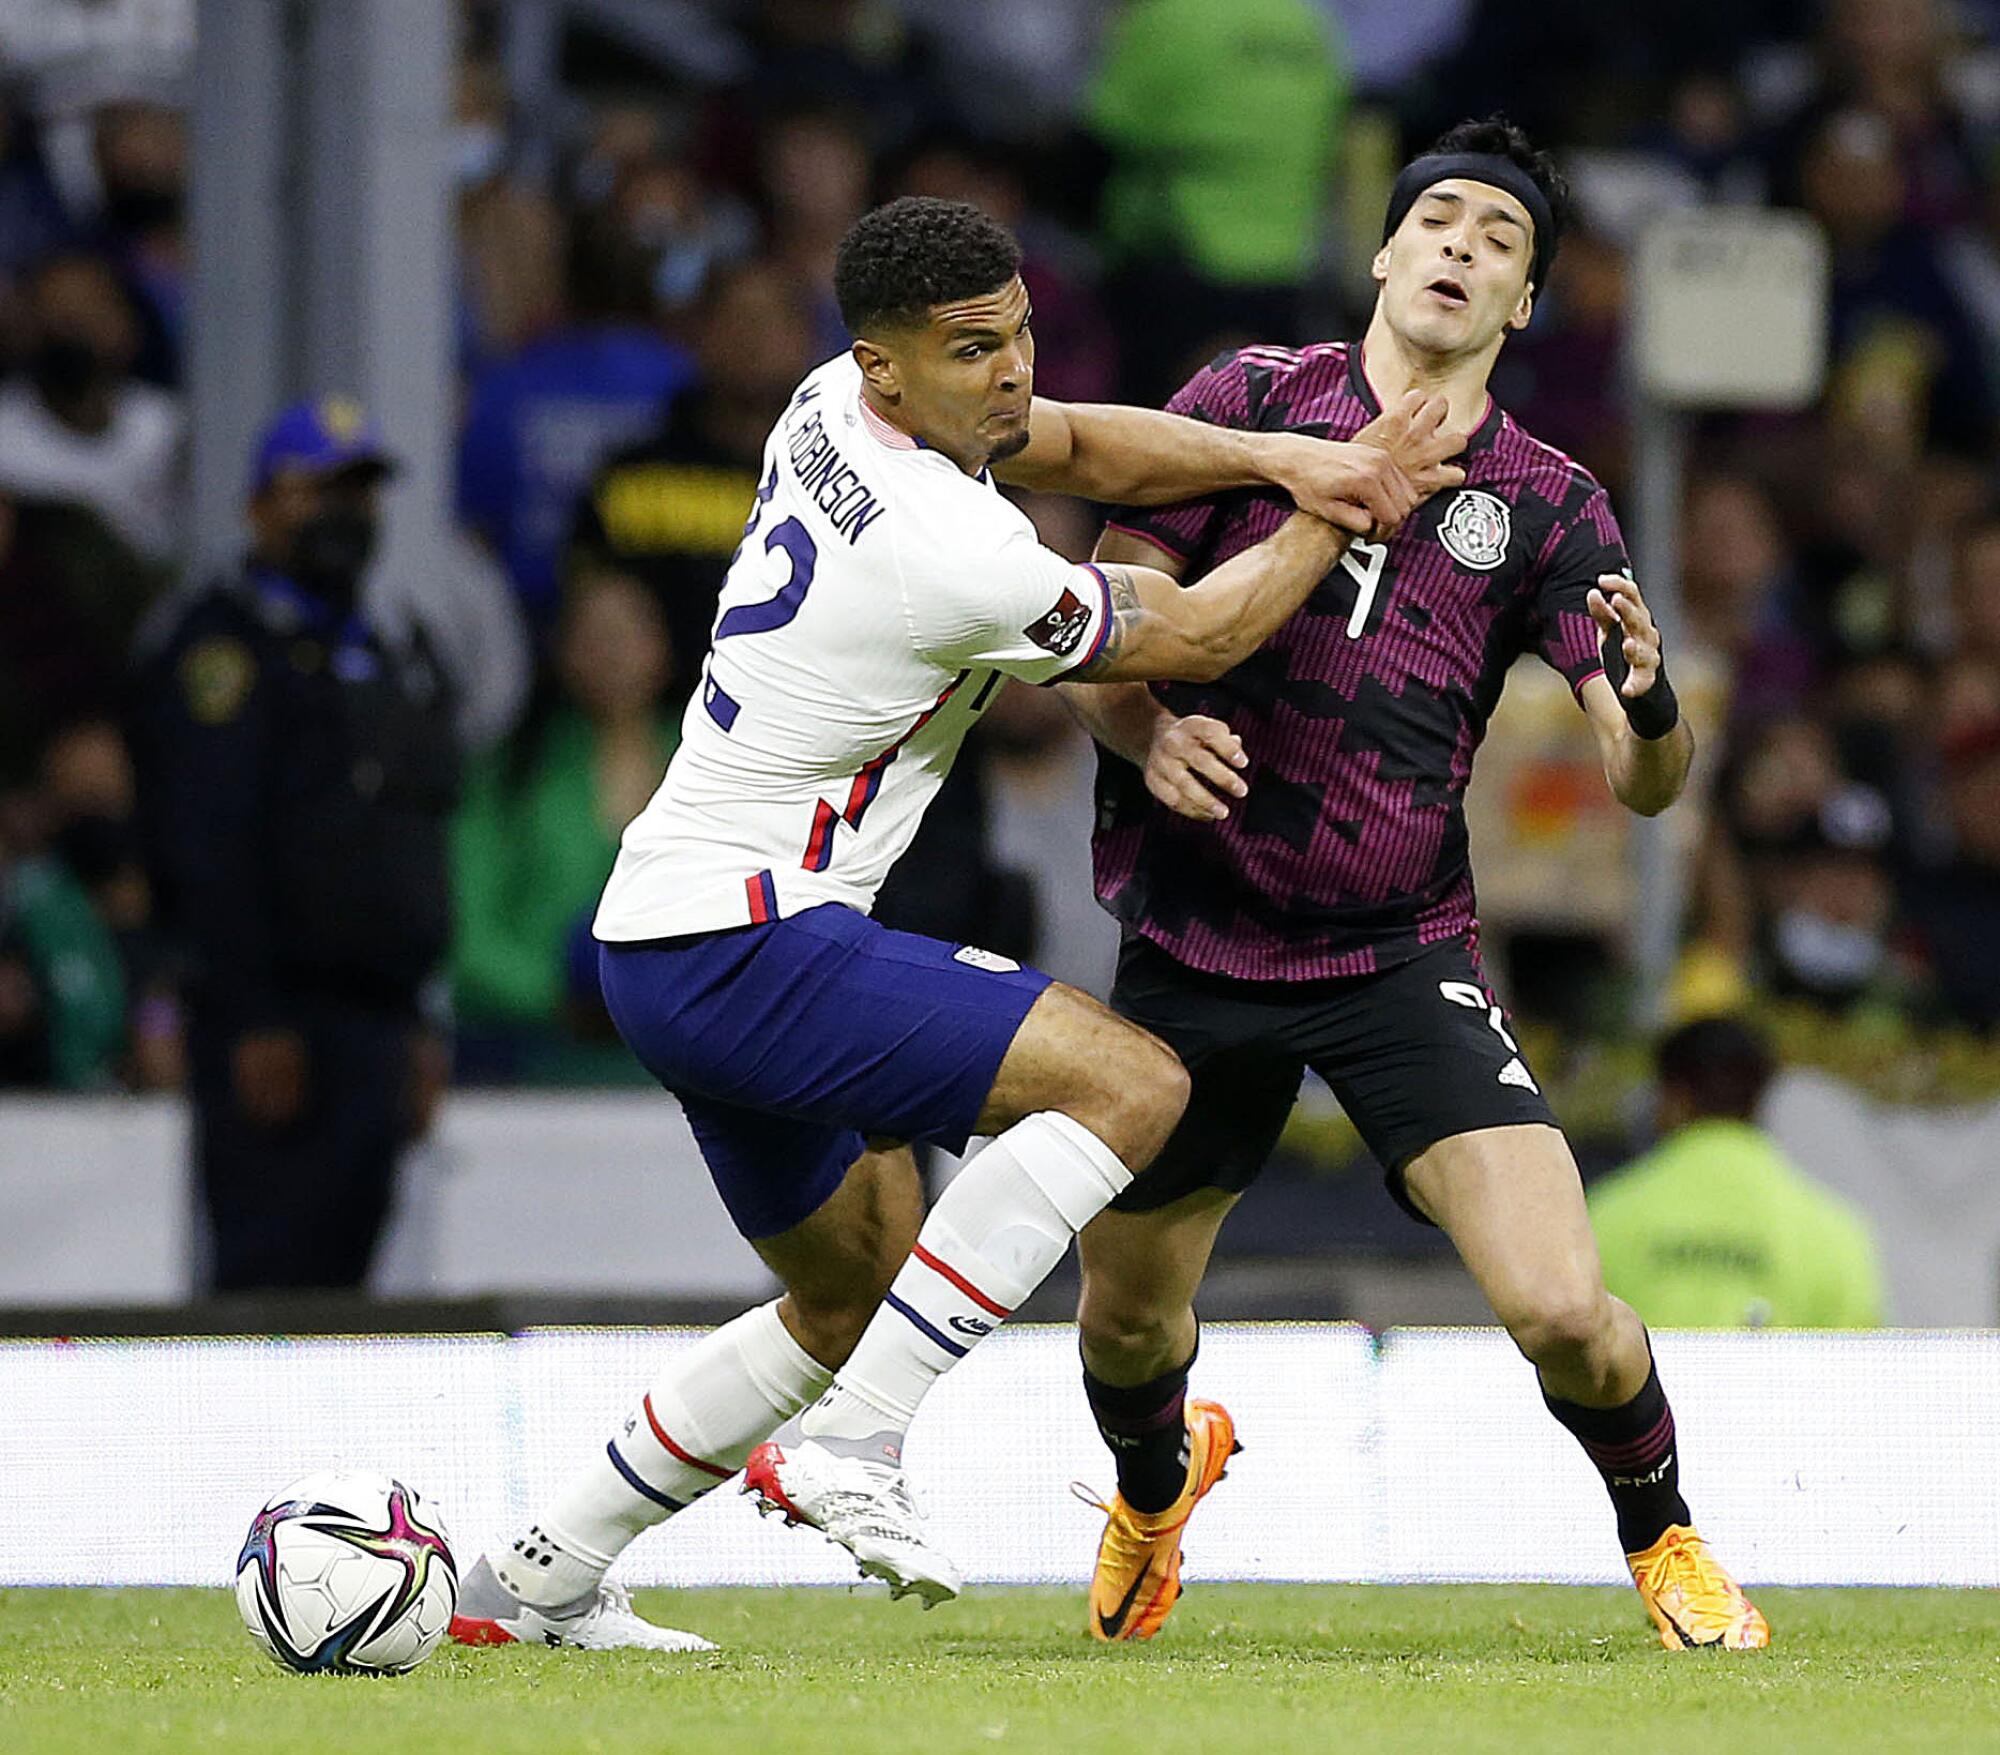 U.S. defender Miles Robinson receives a yellow card for fouling Mexico forward Raul Jimenez during the first half.